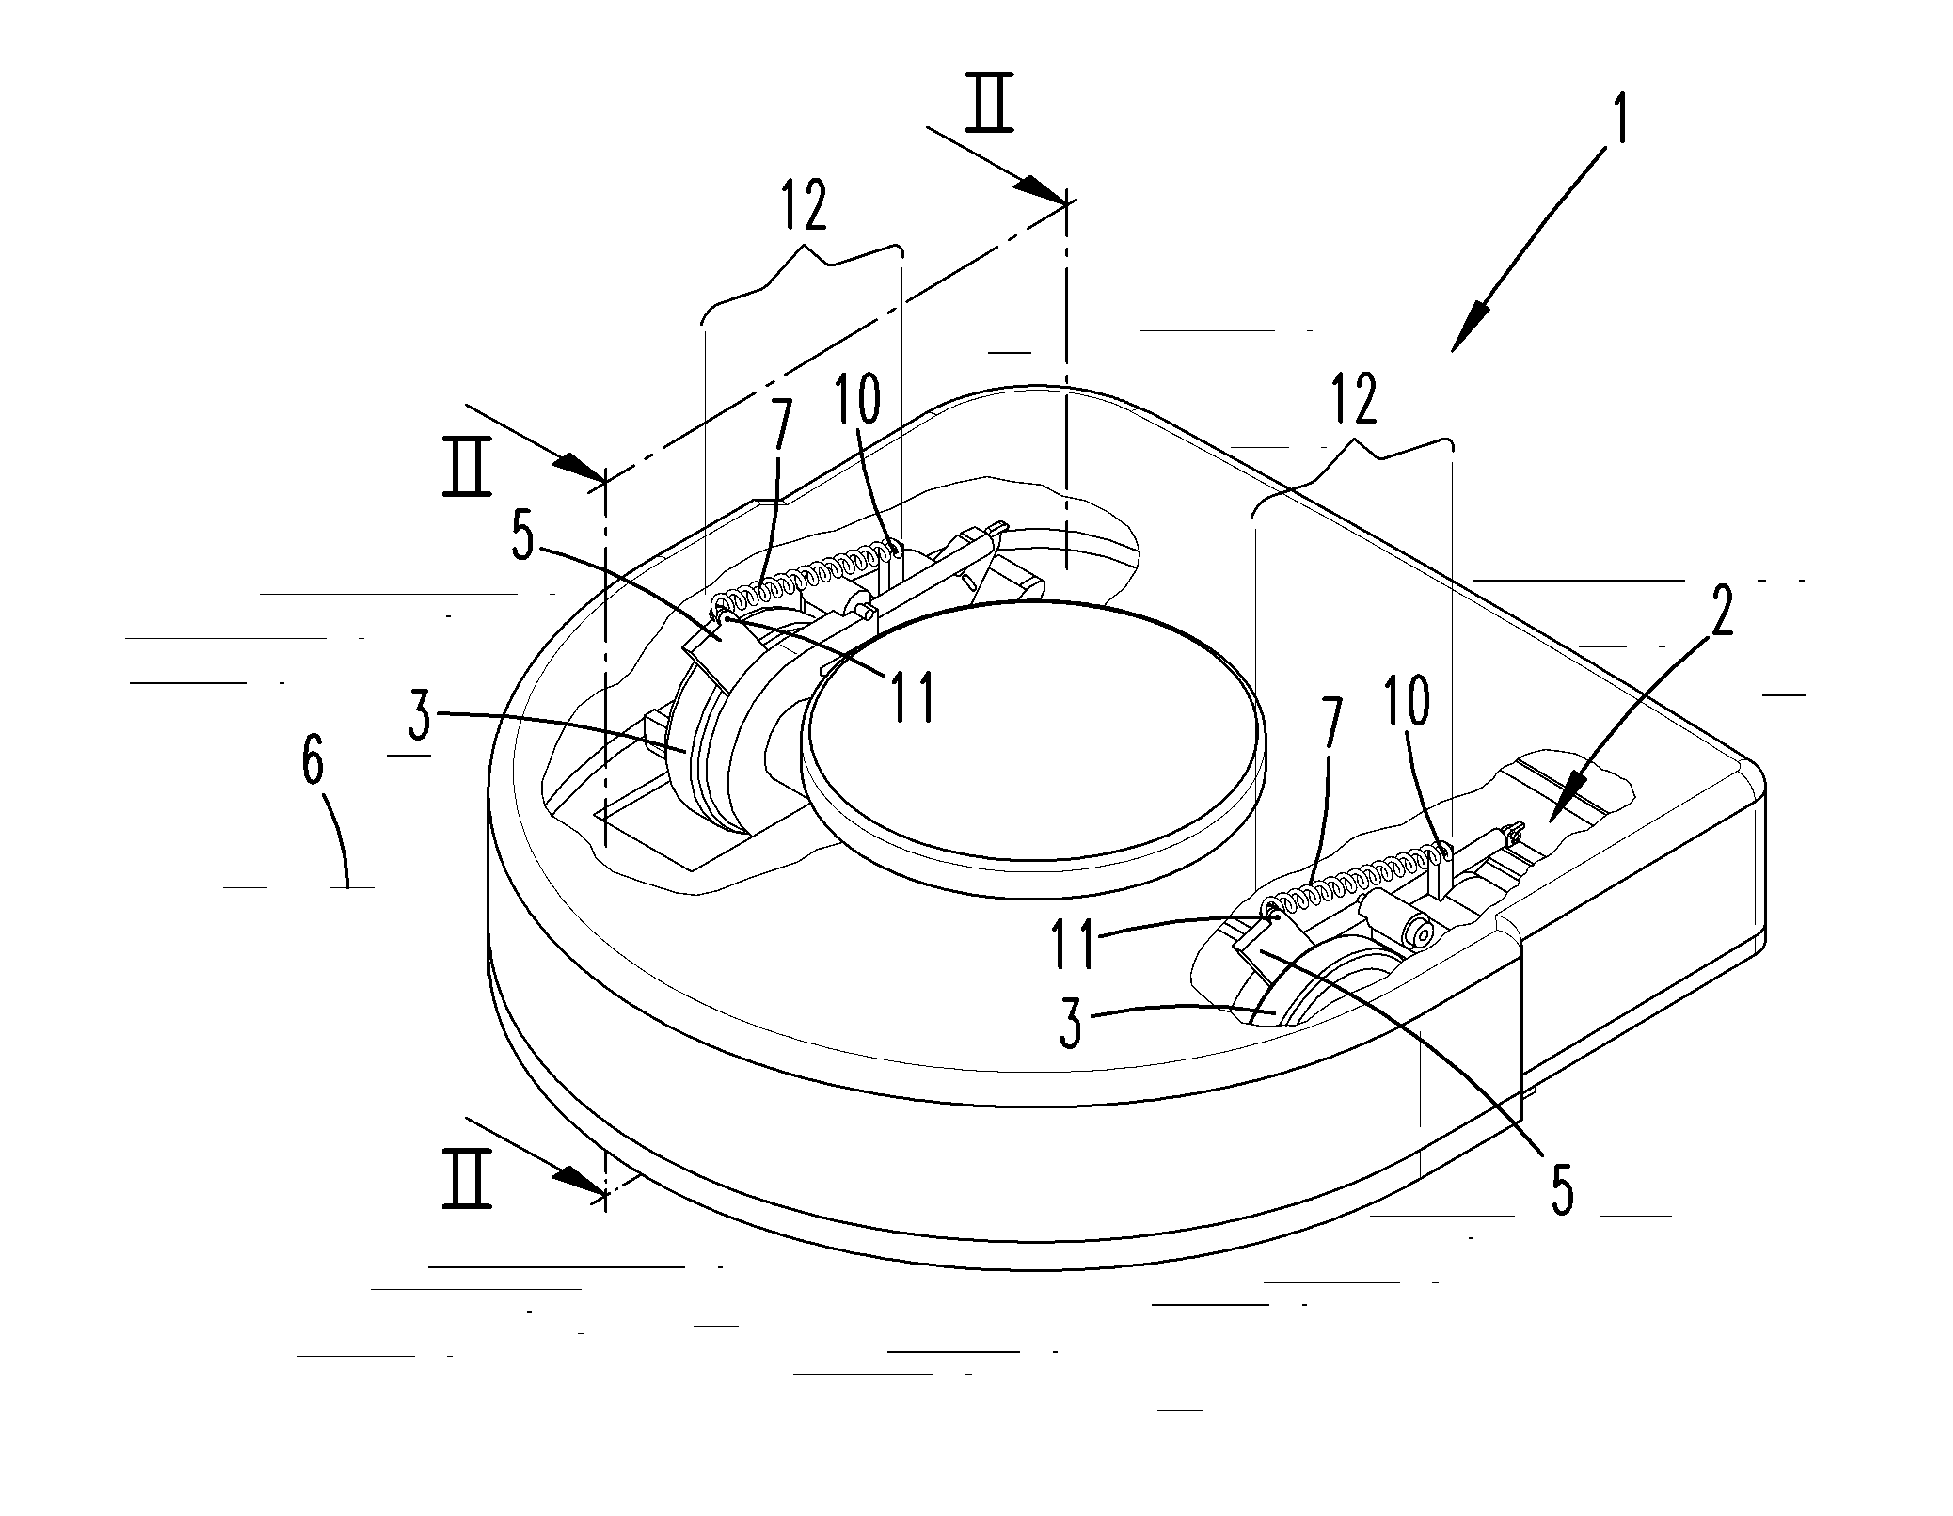 Mobile apparatus, particularly an autonomously mobile floor cleaning device